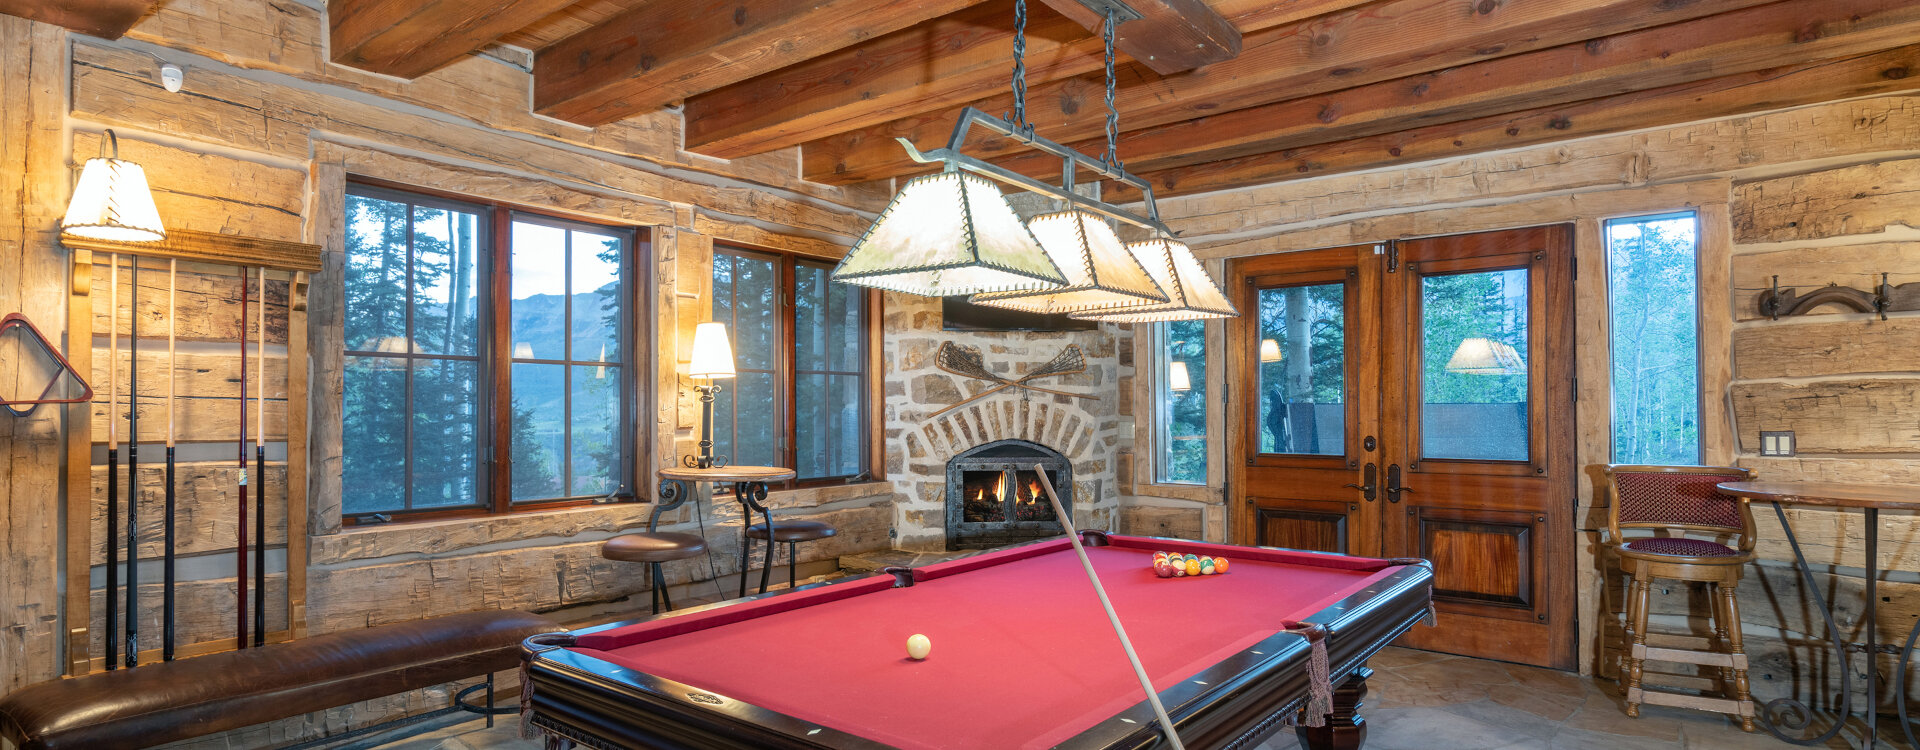 10.02-telluride-picture-perfect-pool-table